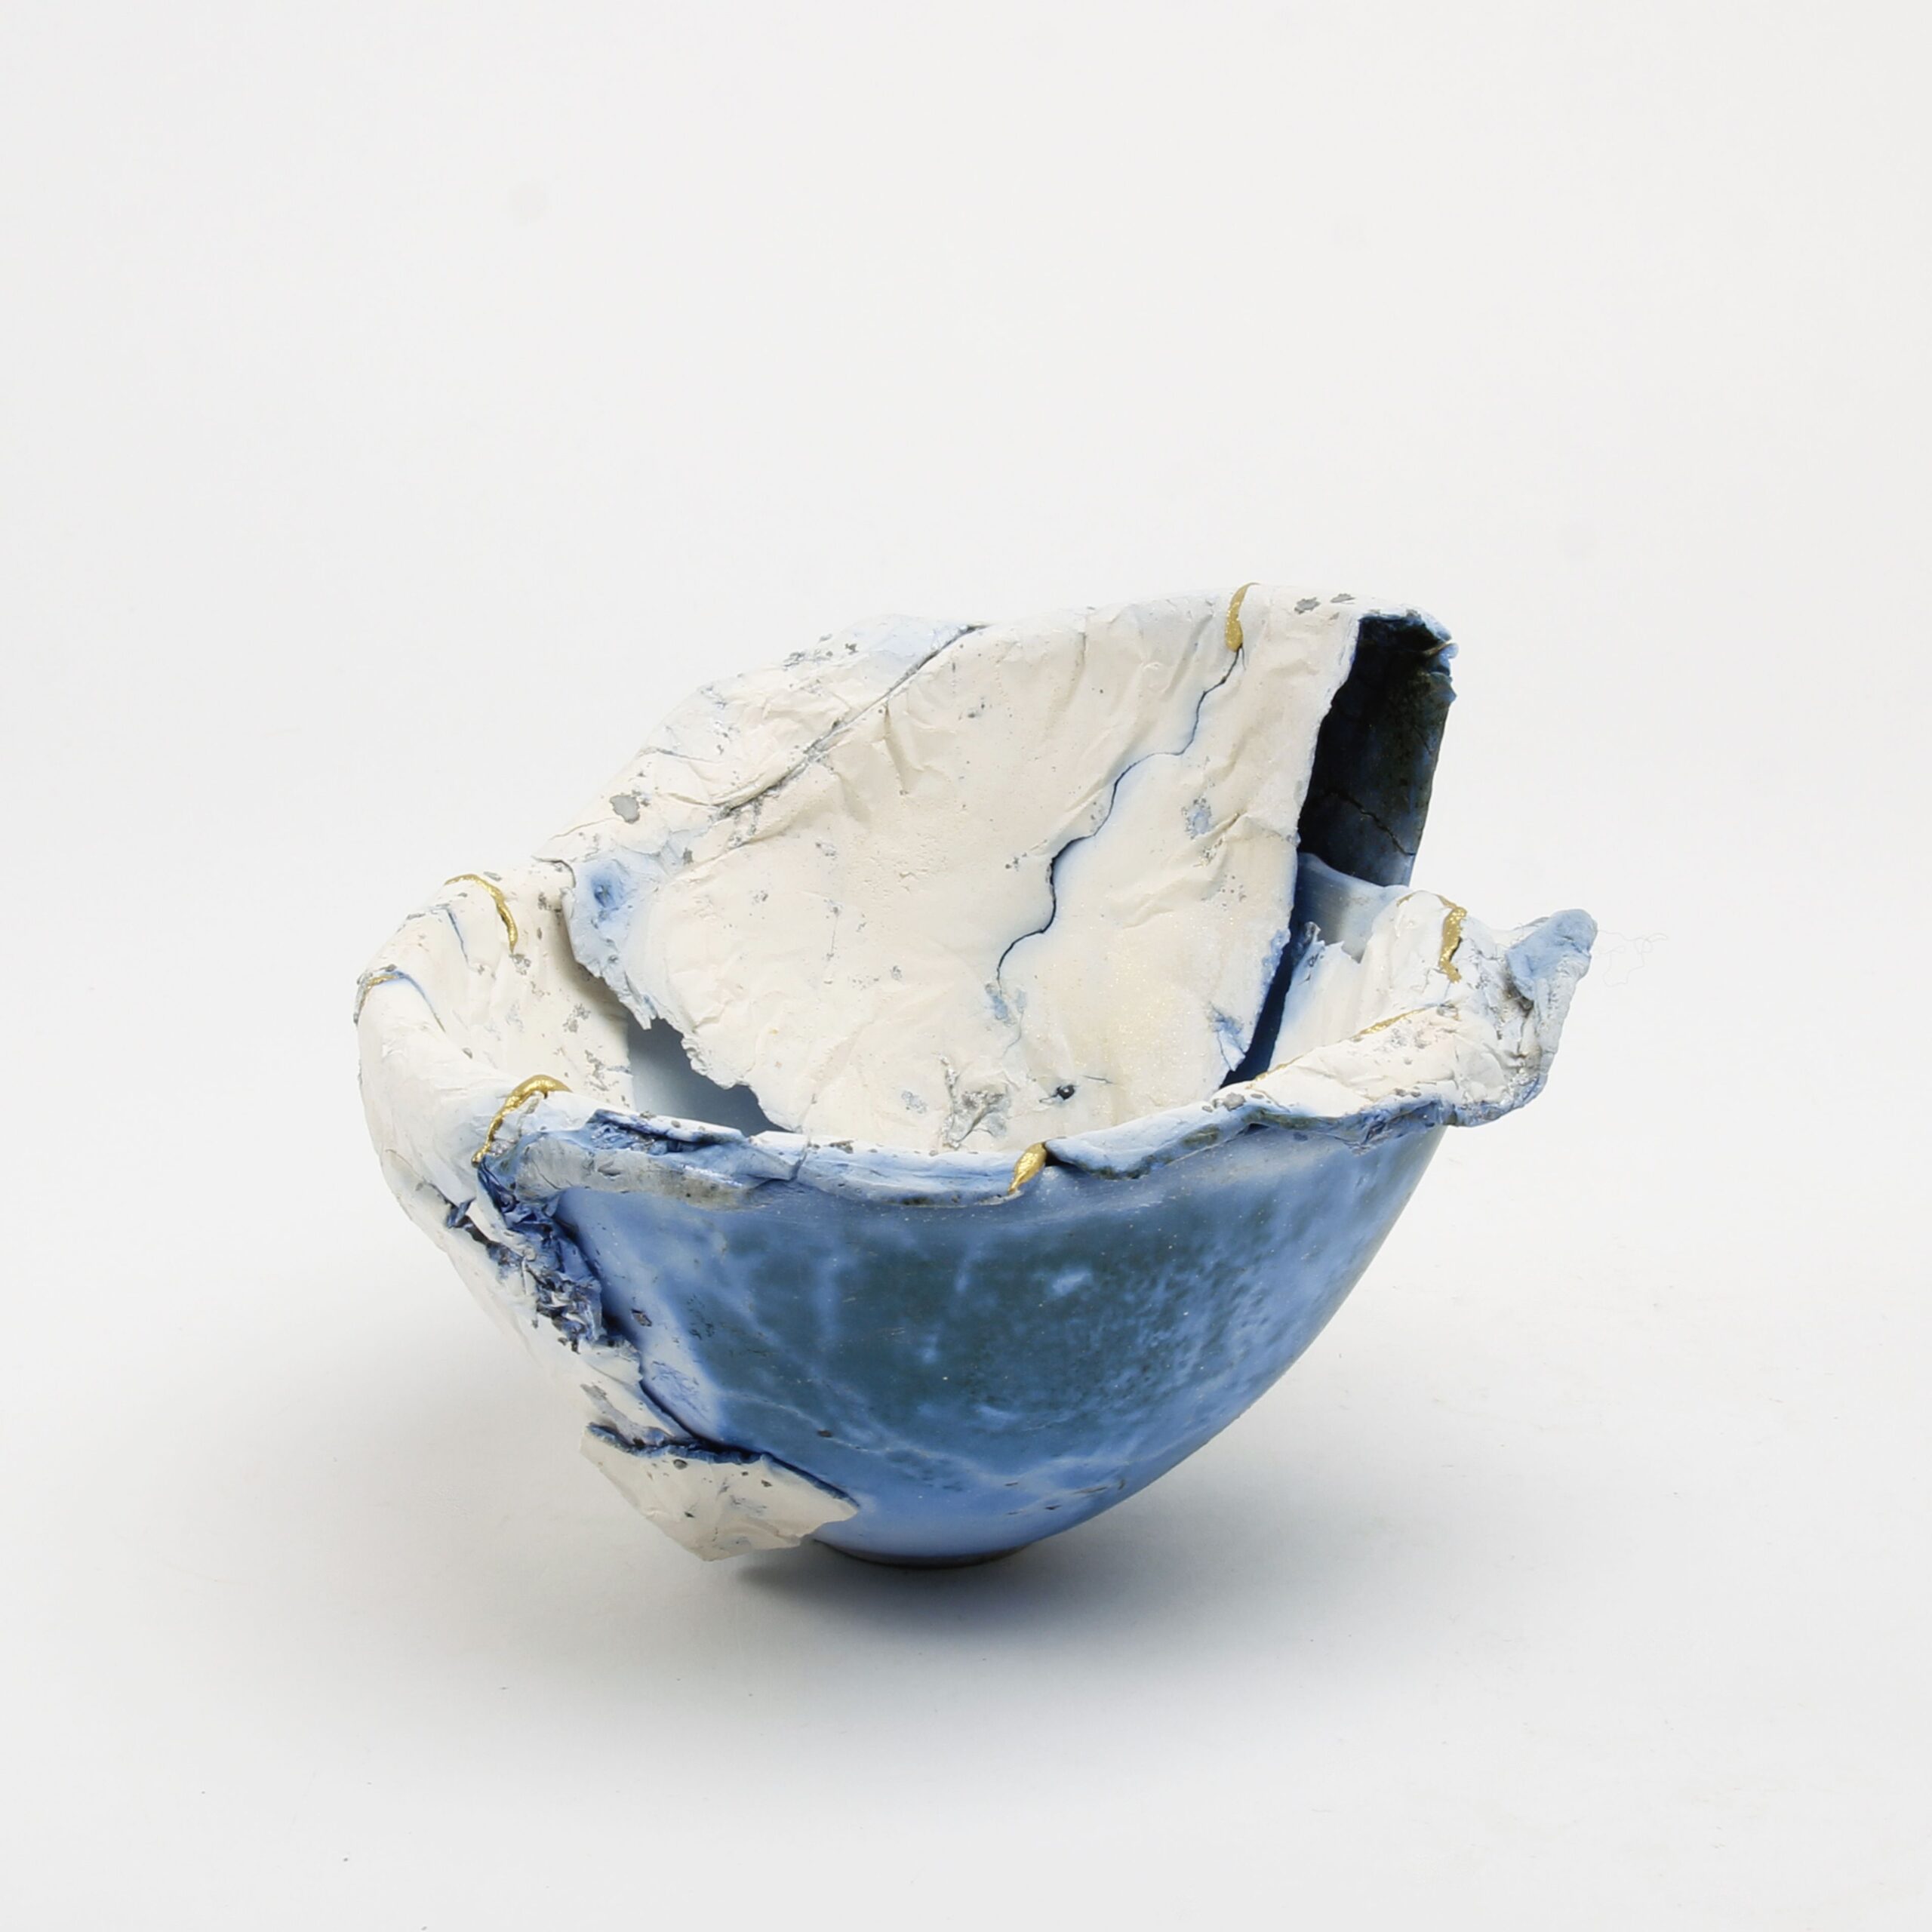 Alison Brannen: Small Sculpture Bowl Product Image 2 of 2